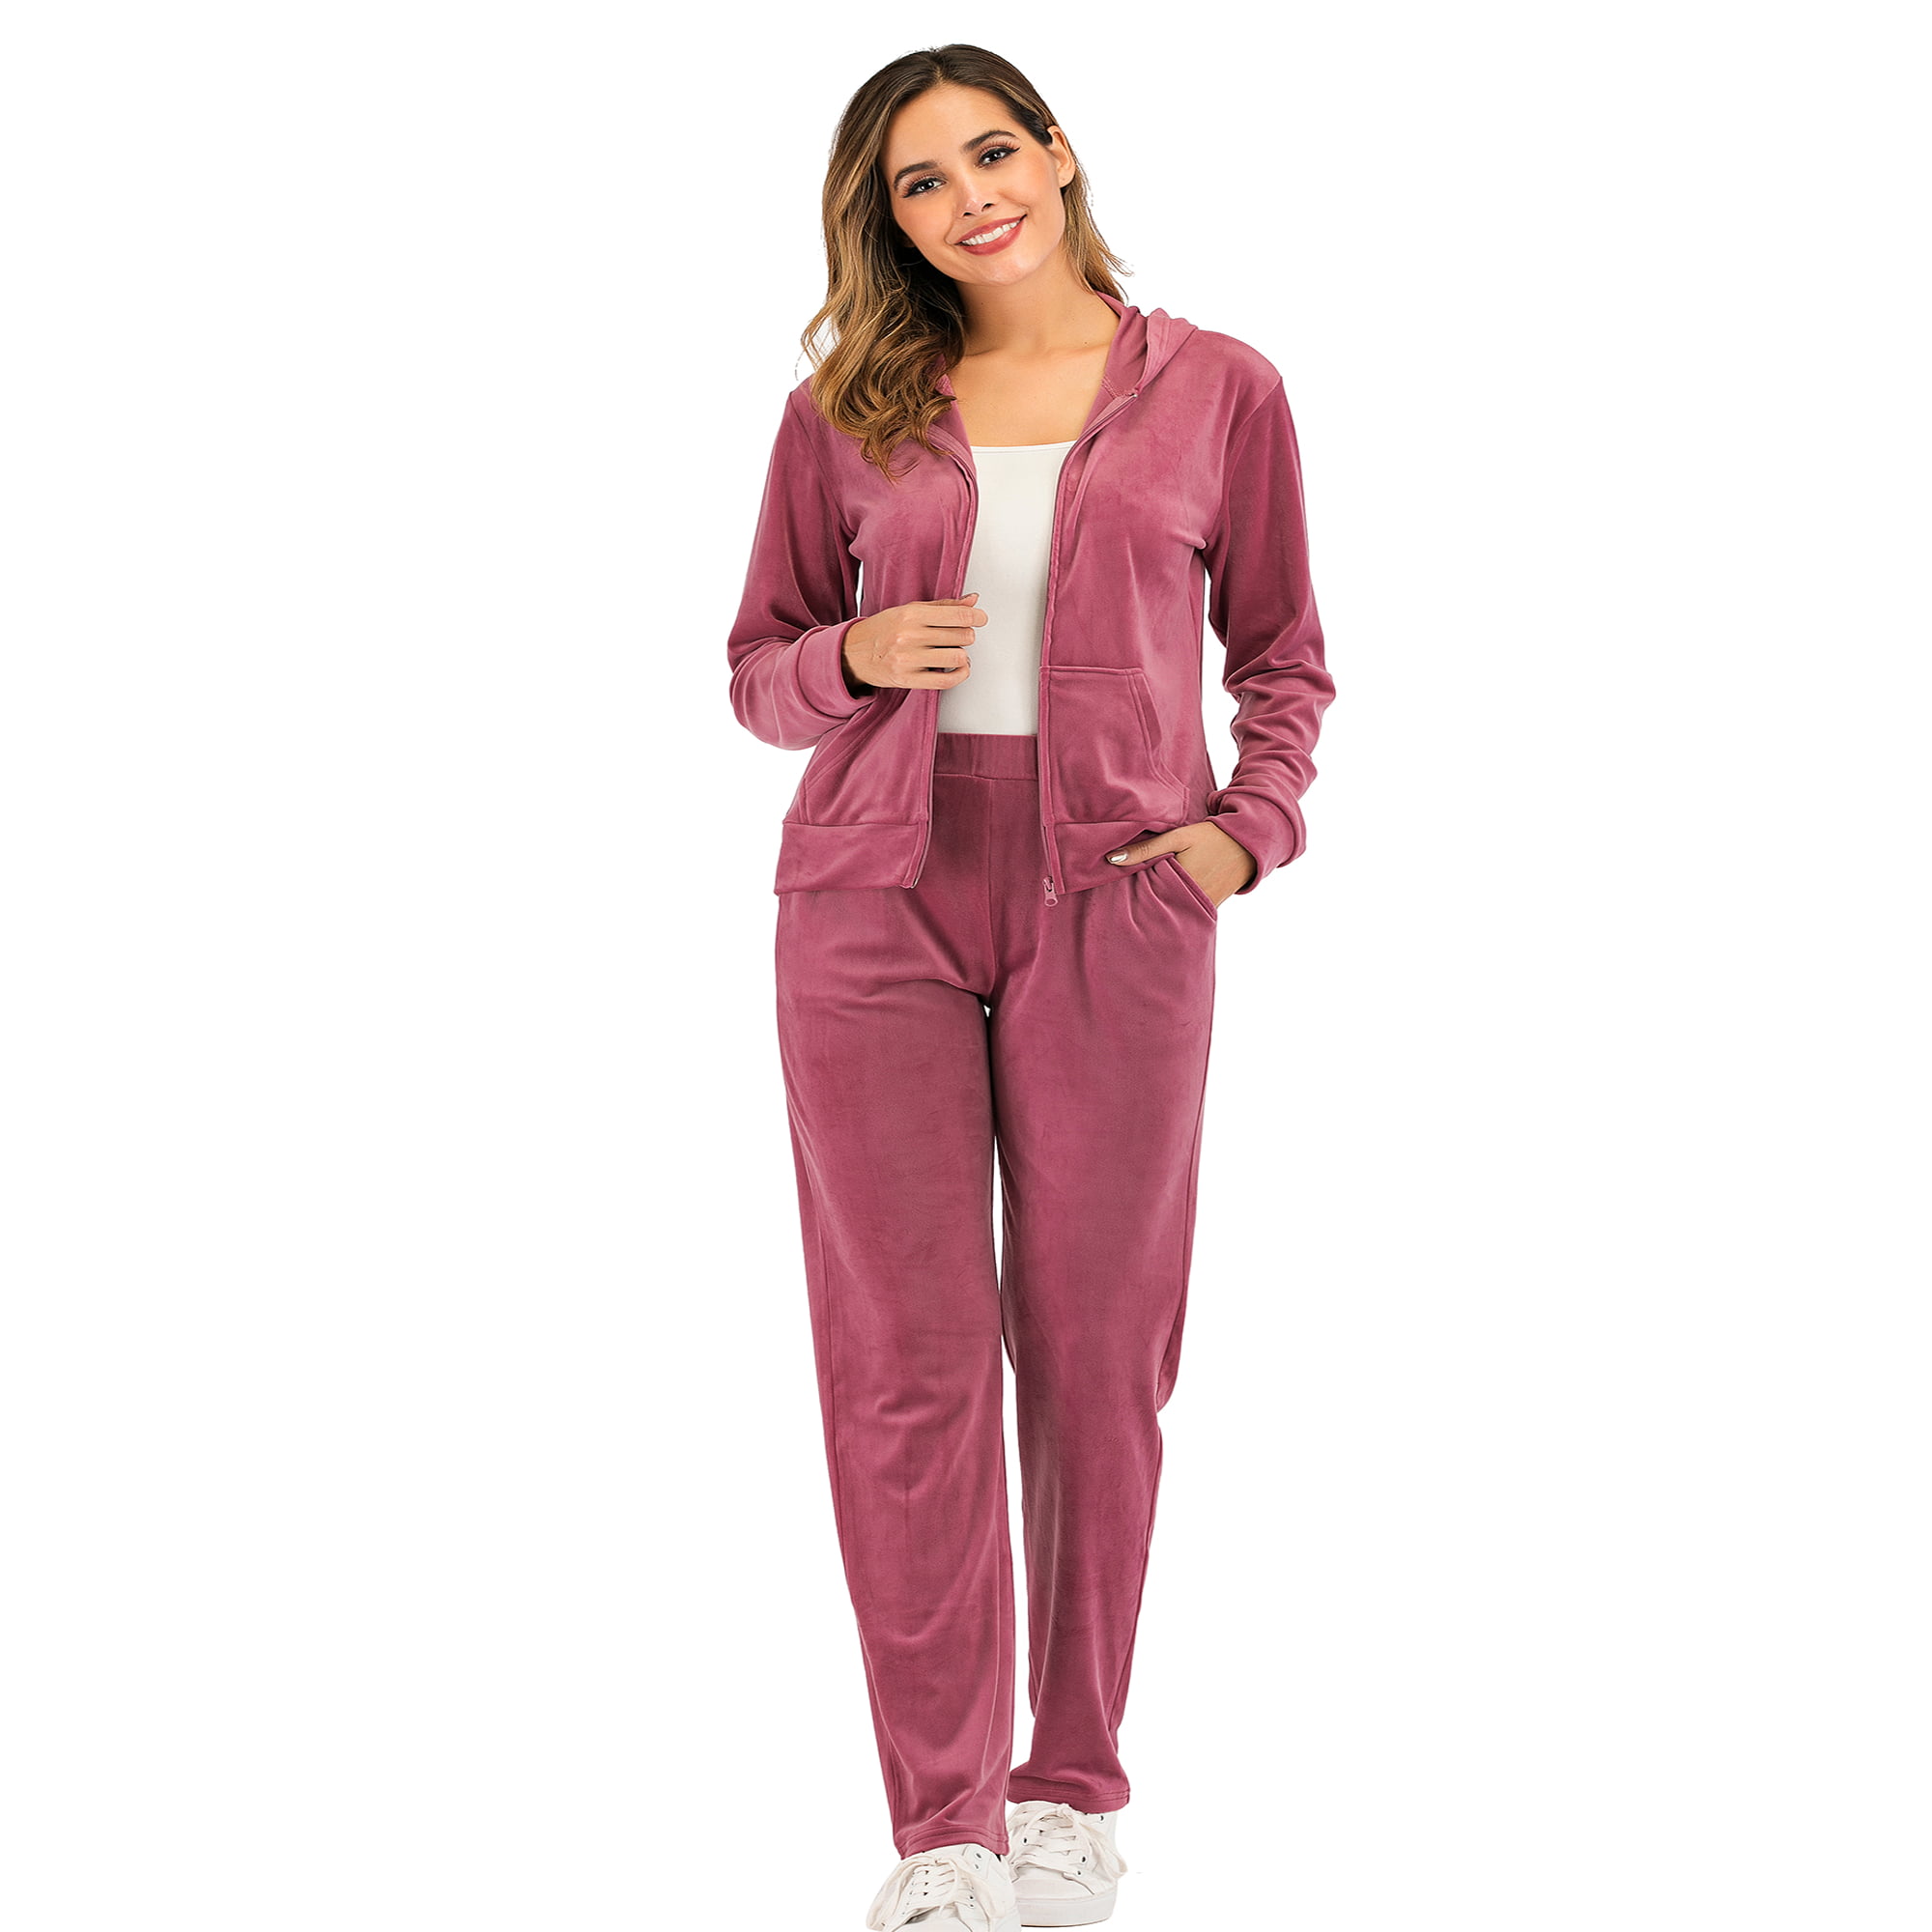 FOCUSSEXY Women's Two Piece Solid Velvet Tracksuit Set Full Zipper-Up Hooded Sweatshirts and Pants Sweatsuit Set Activewear Red/Purple, Size: US 18-20